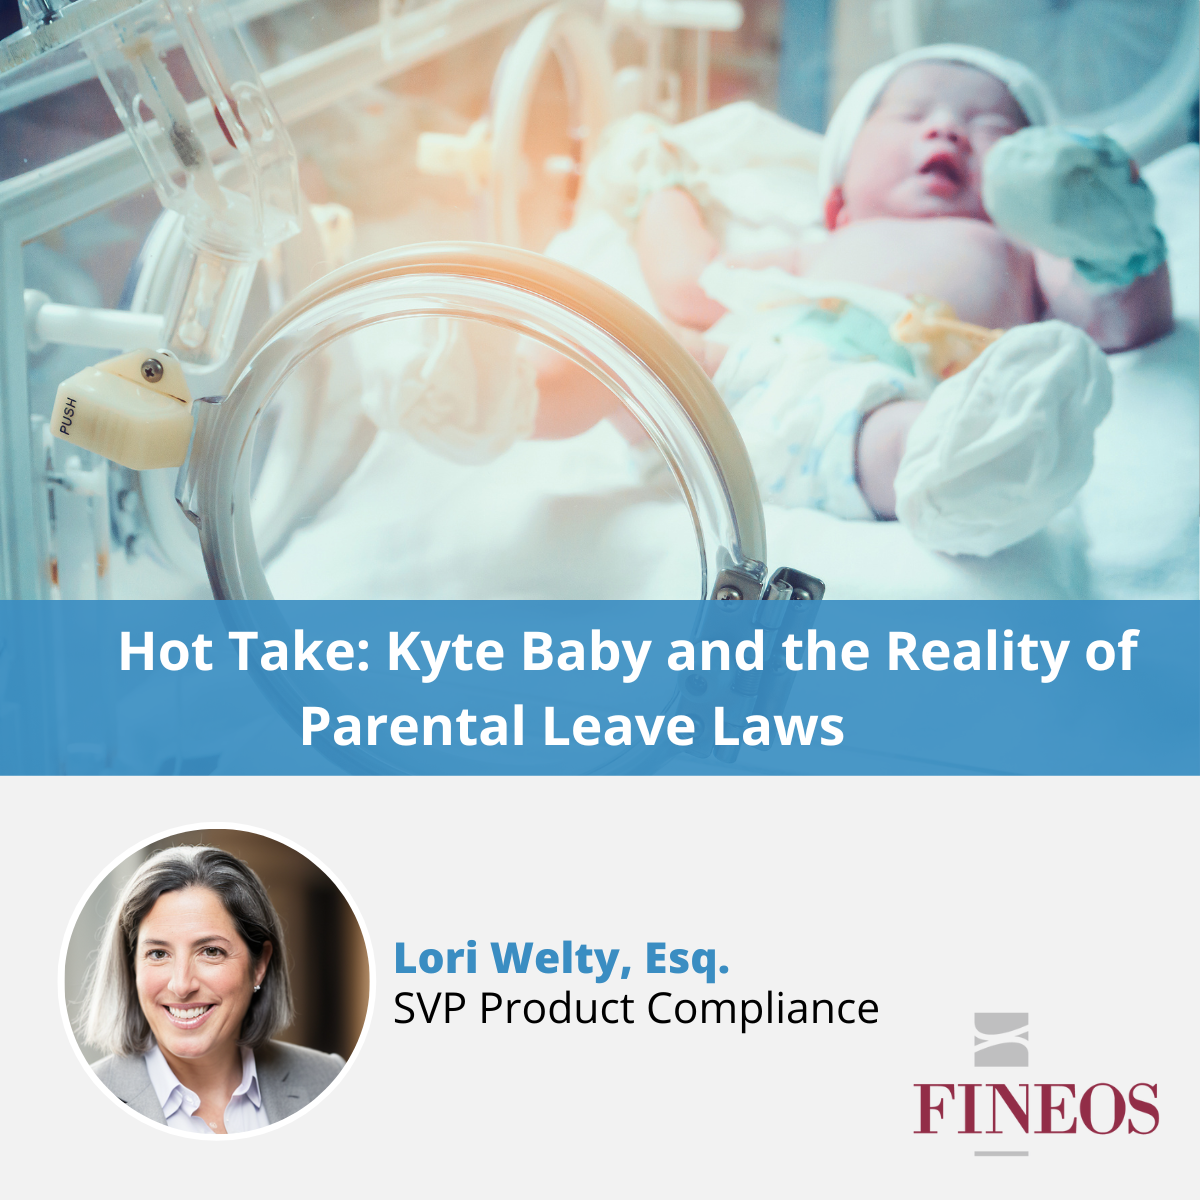 Kyte Baby and the Reality of Parental Leave Laws